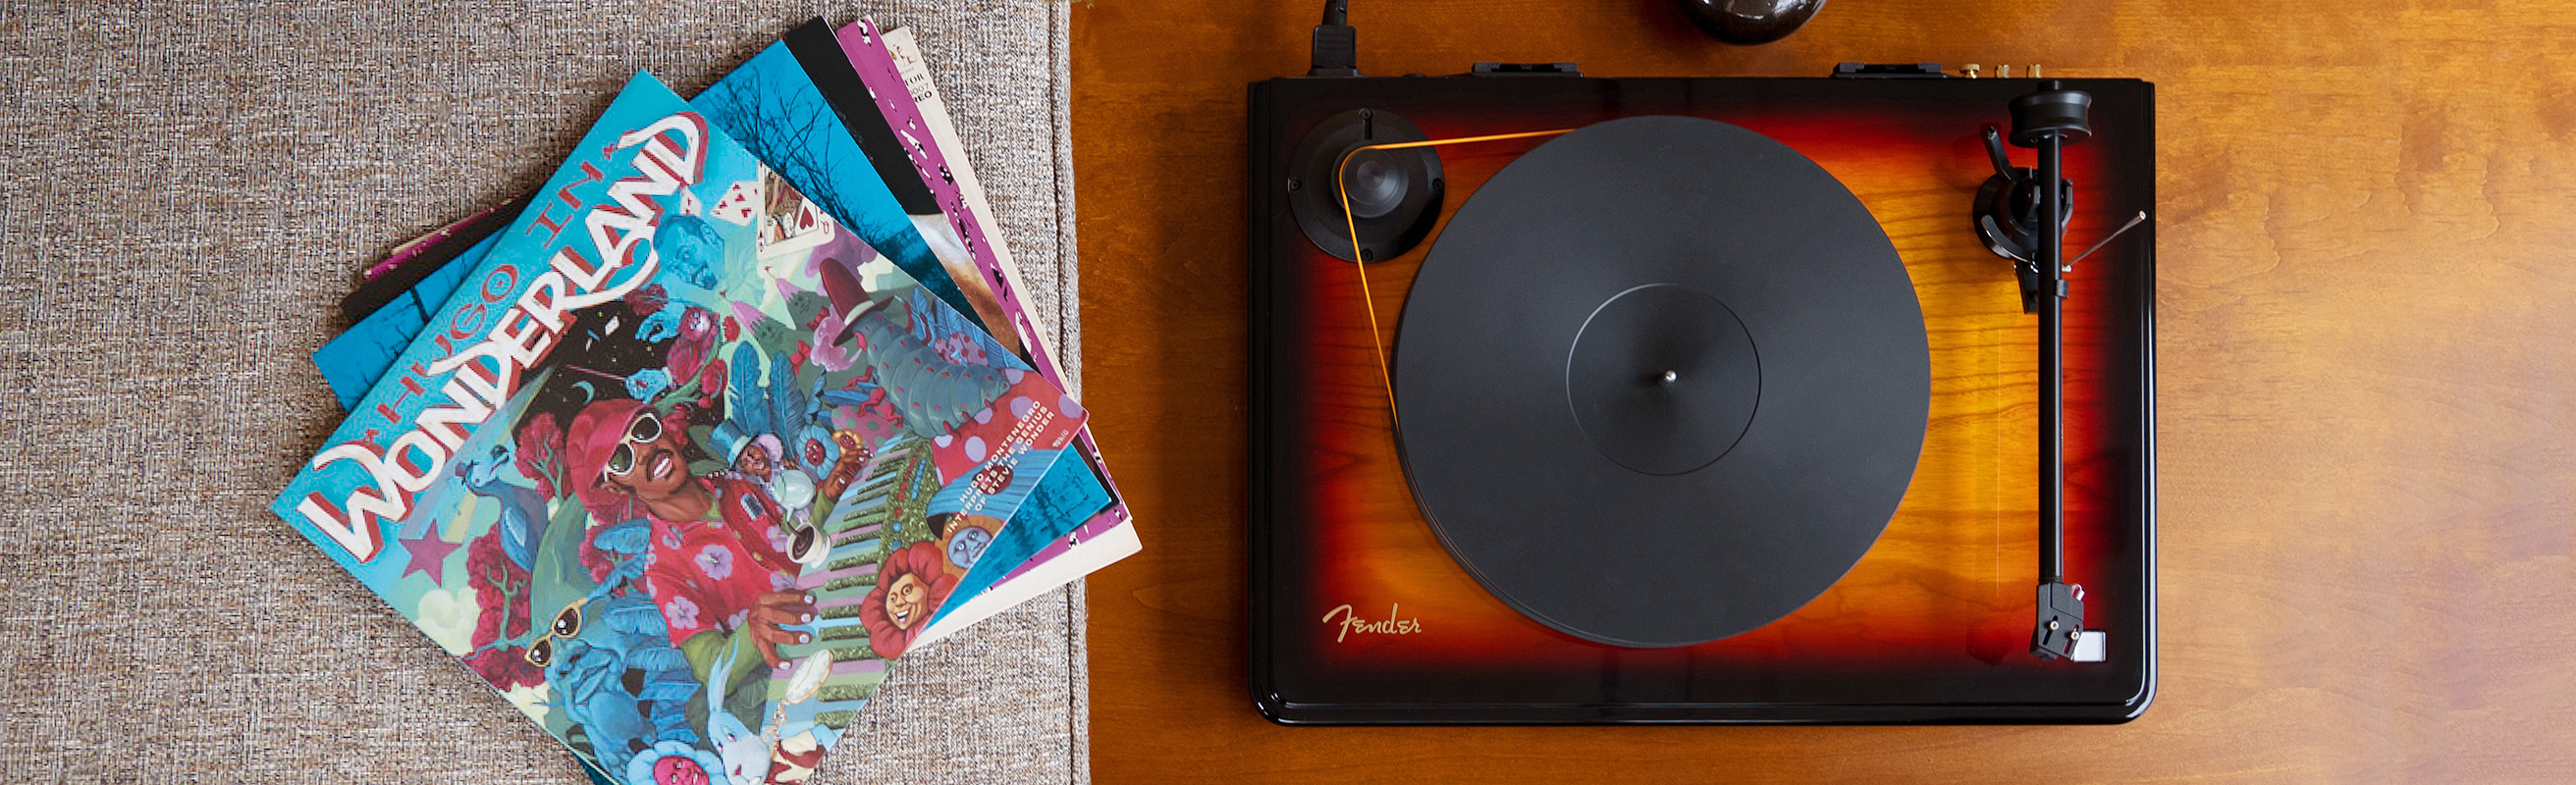 Scully Forfærdeligt Odds Learn All About the New Fender x Mobile Fidelity Turntable, Inspired by the  Precision Bass® | Fender